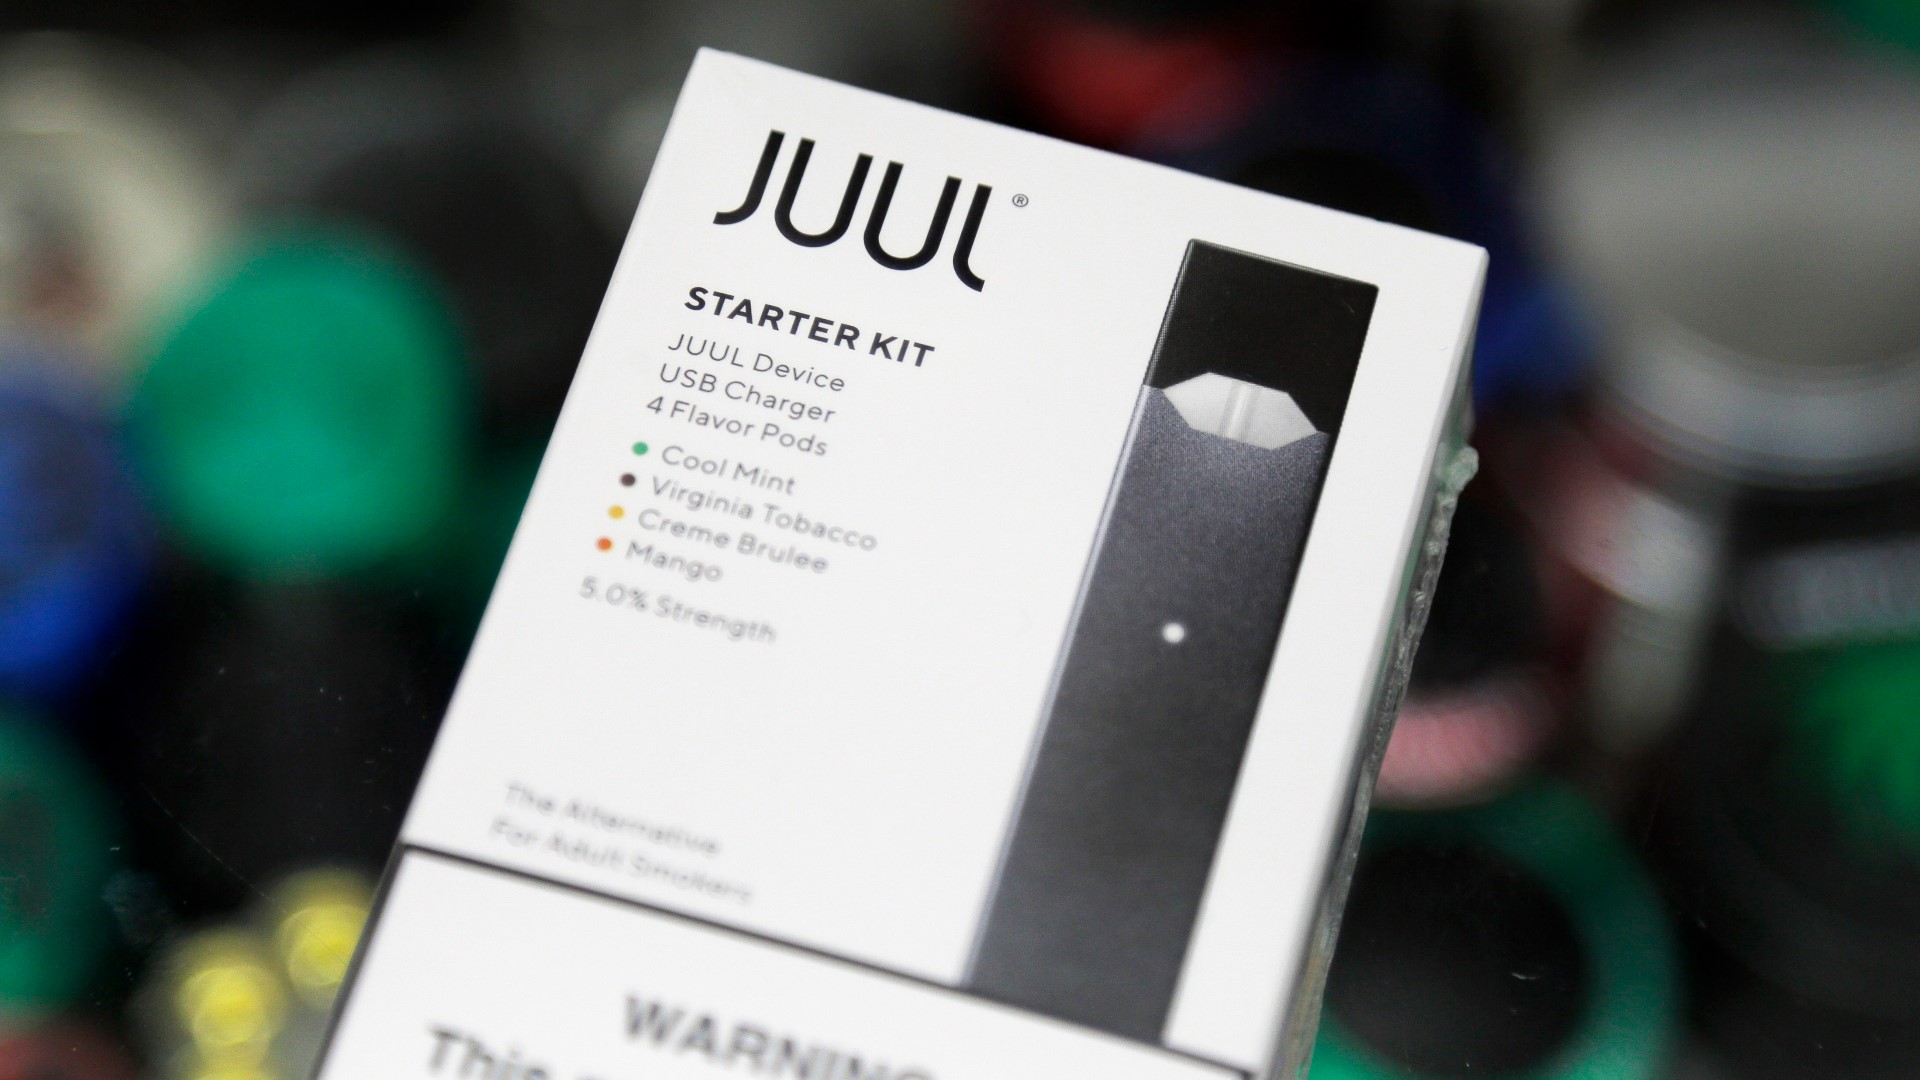 The investigation found that Juul marketed its e-cigarettes to underage teens with launch parties, giveaways, ads and social media posts using youthful models.